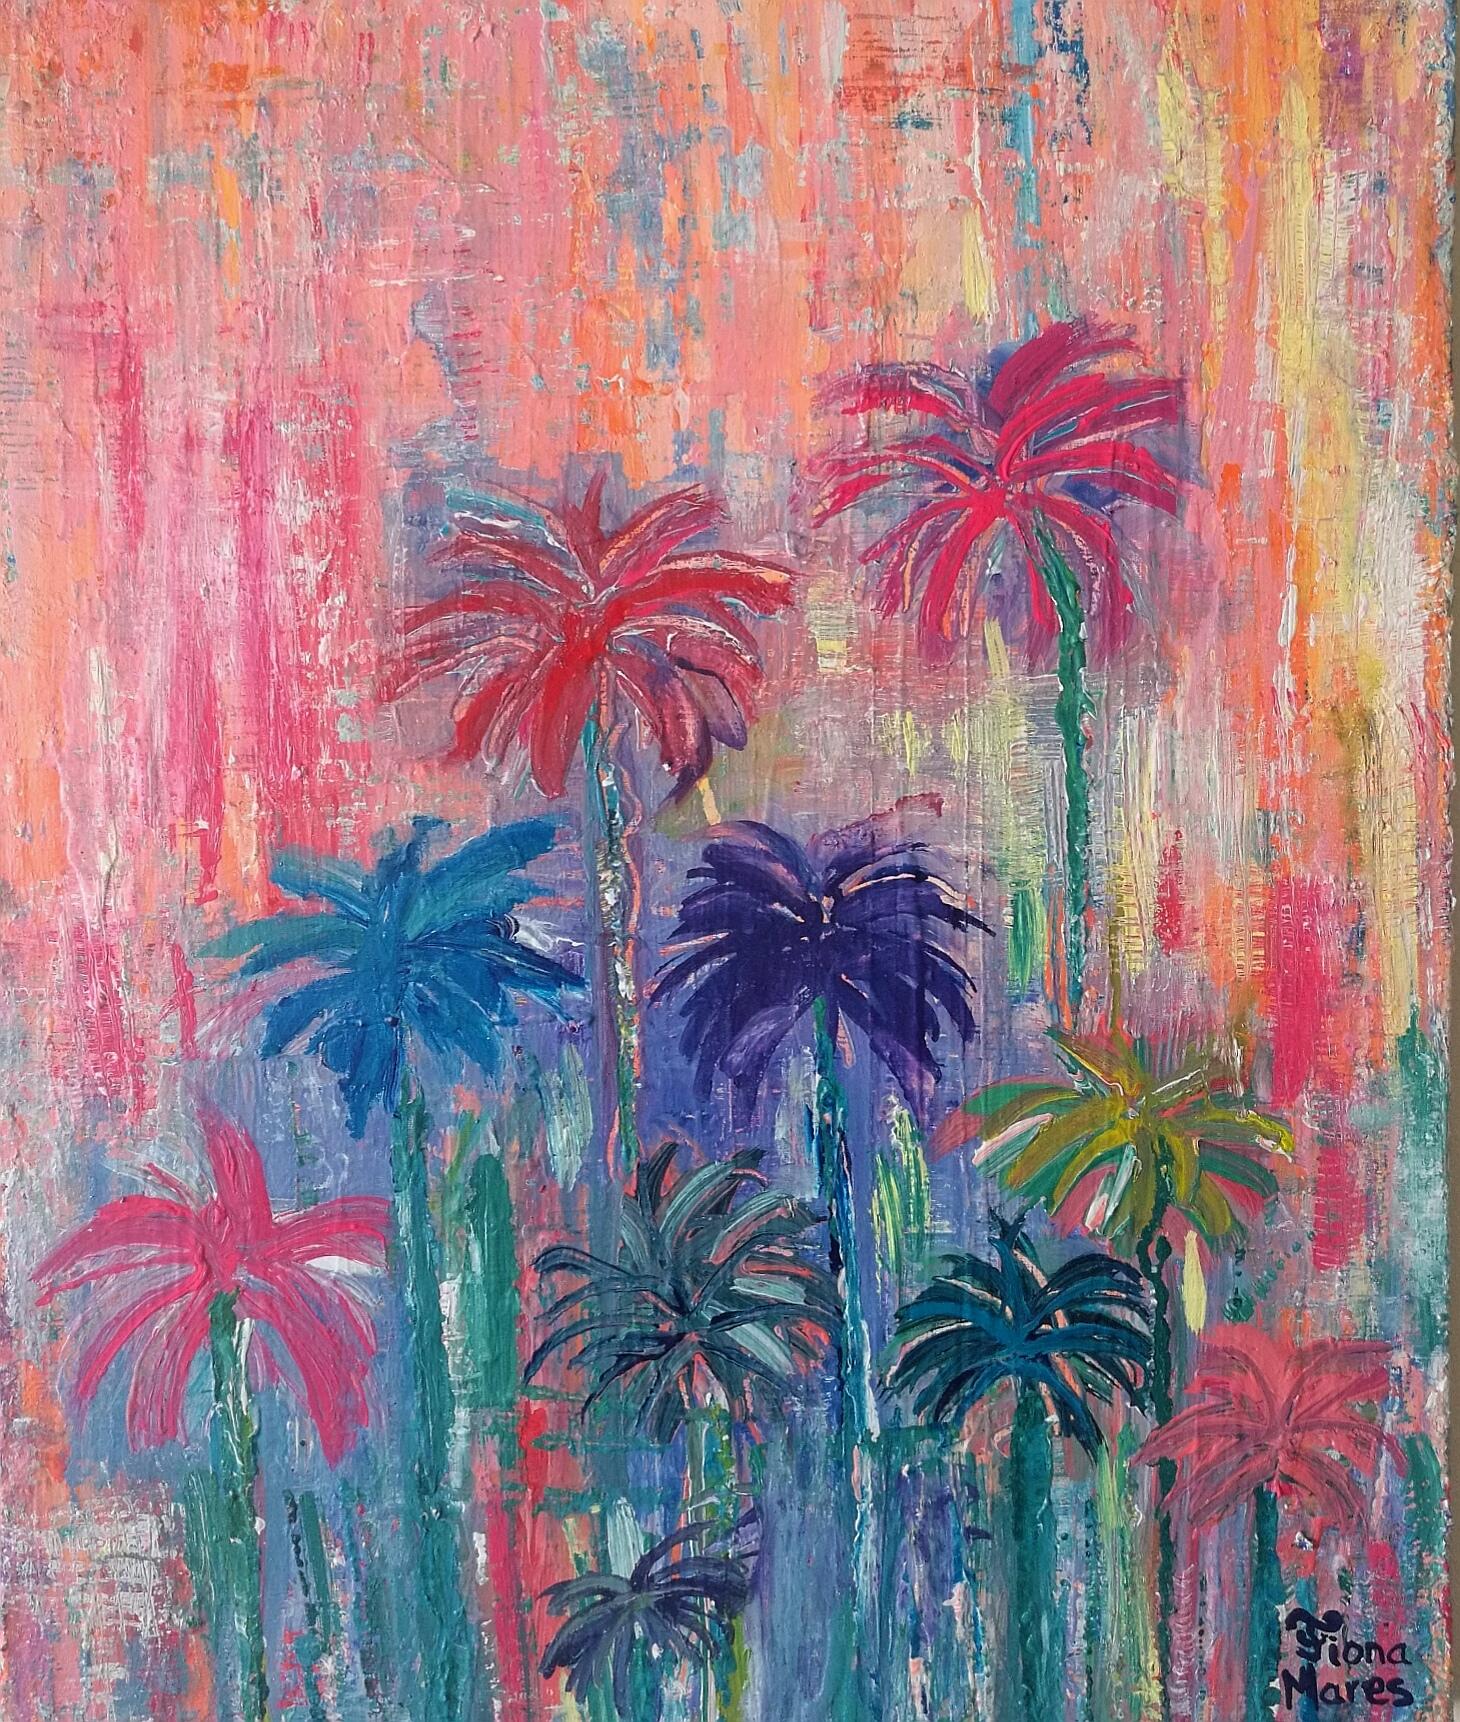 "Palm garden in the glowing sun" by Fiona Mares, Painter #wanddeko ©Fiona Mares